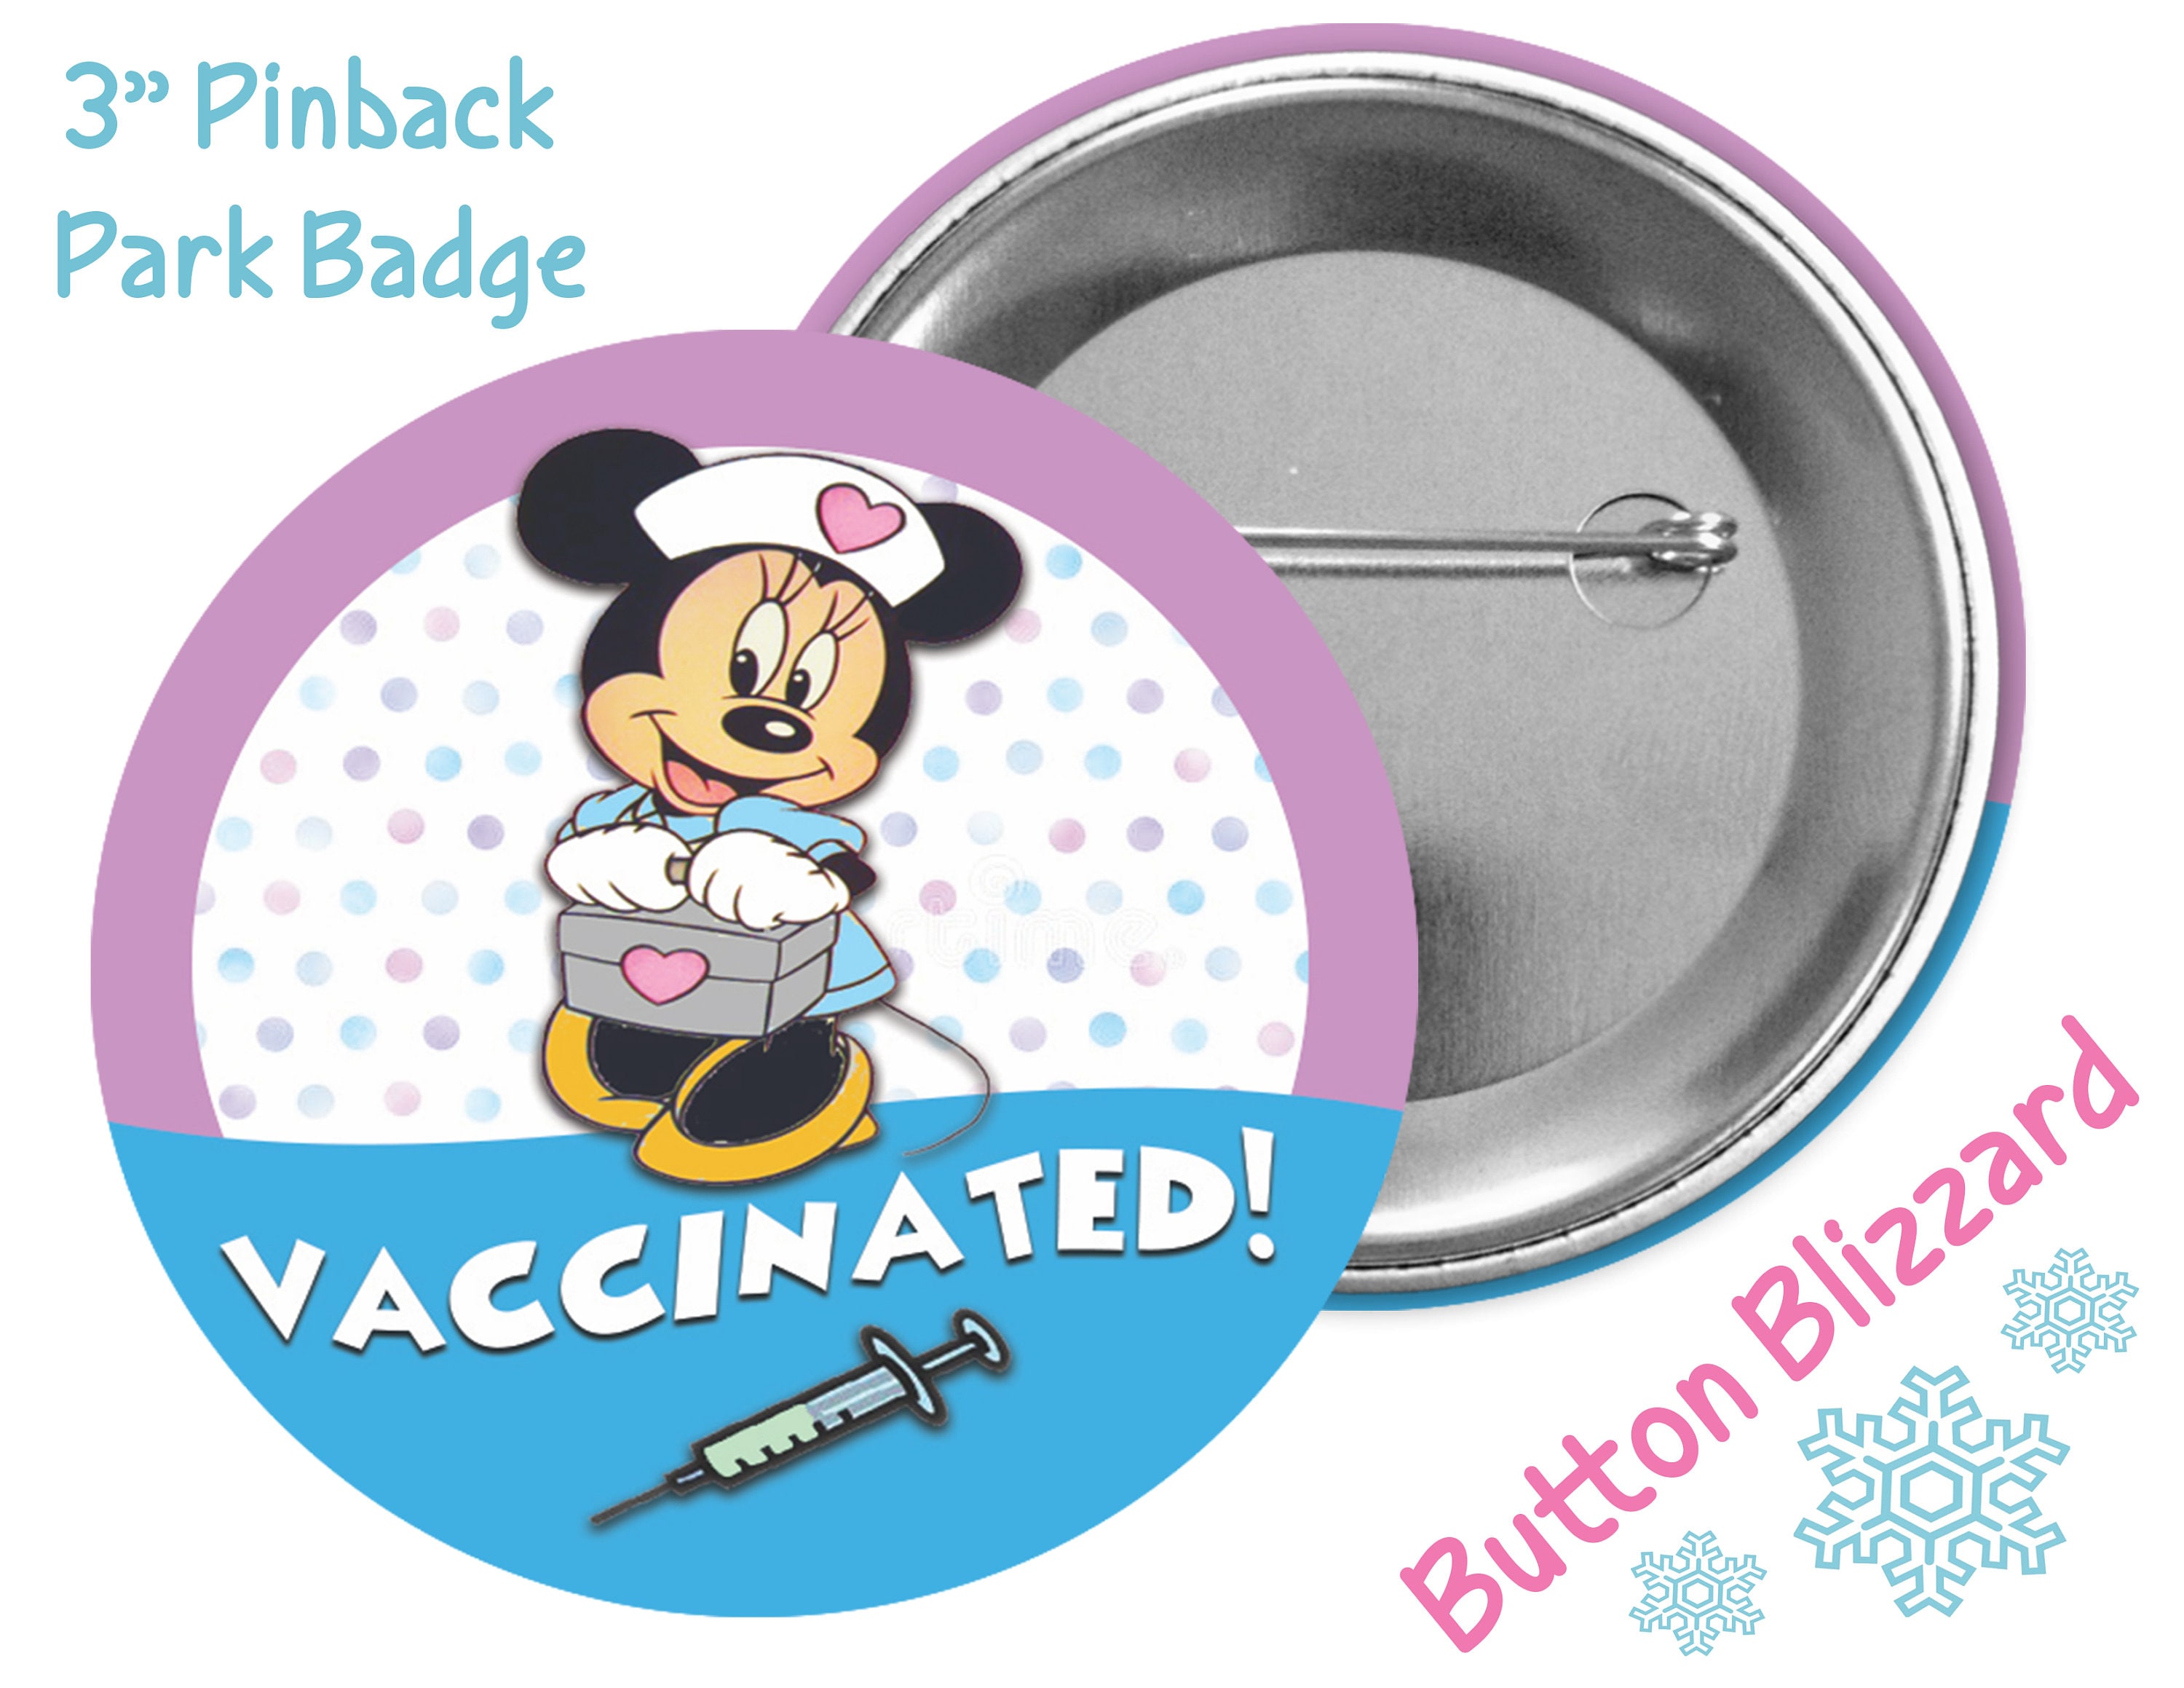 2.25 Disney Vaccinated pin back buttons